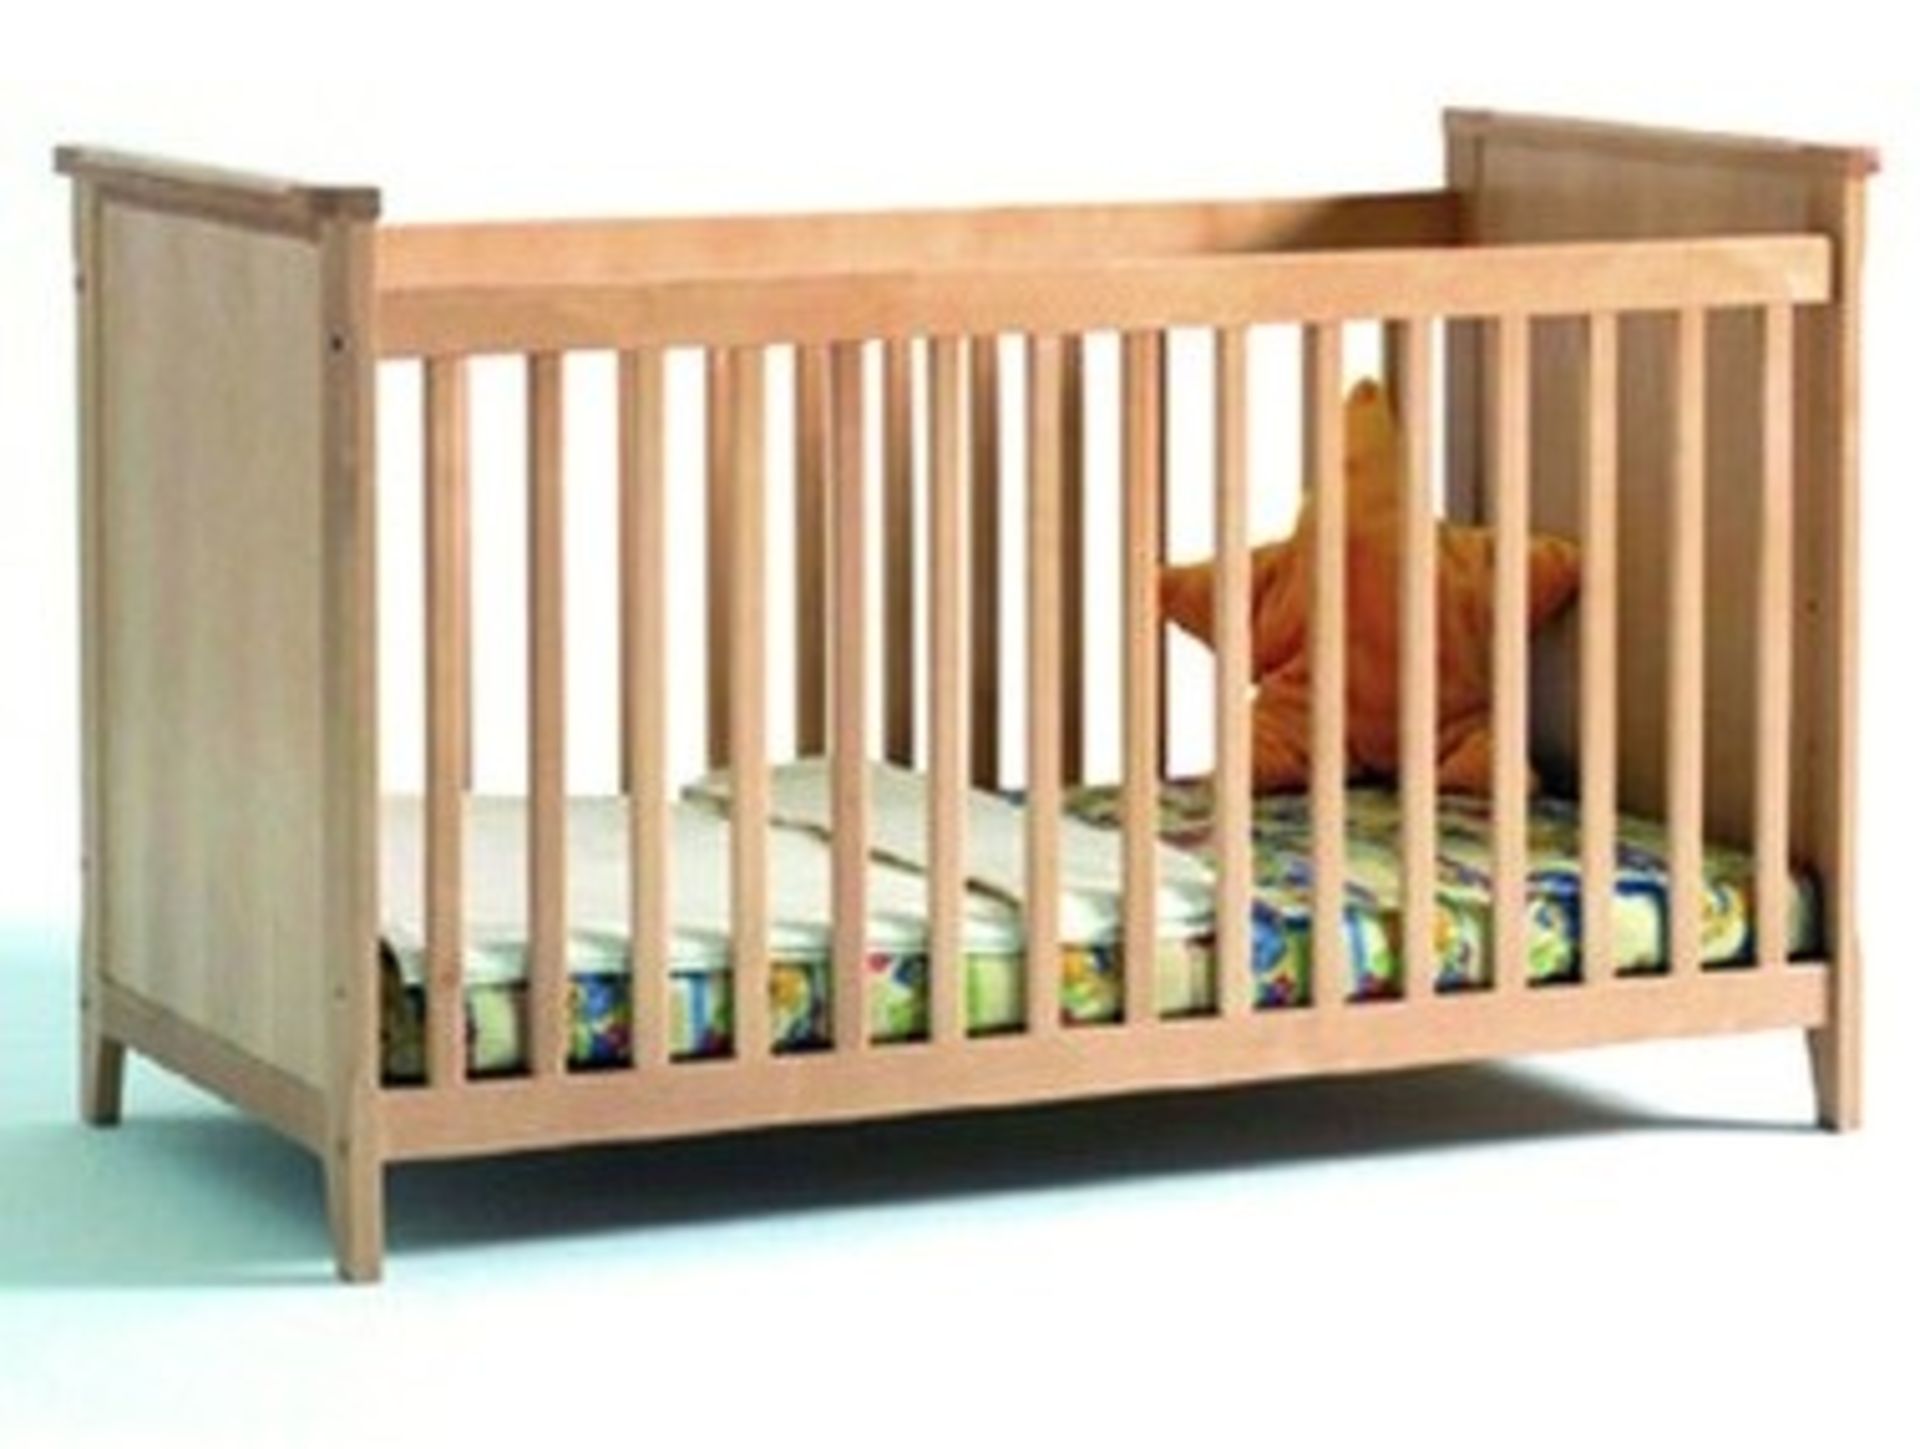 1 x Vienna Solid Wood Nursery Furniture Set - Birch - Includes Baby Changing Unit & Cot Brand - Image 3 of 3